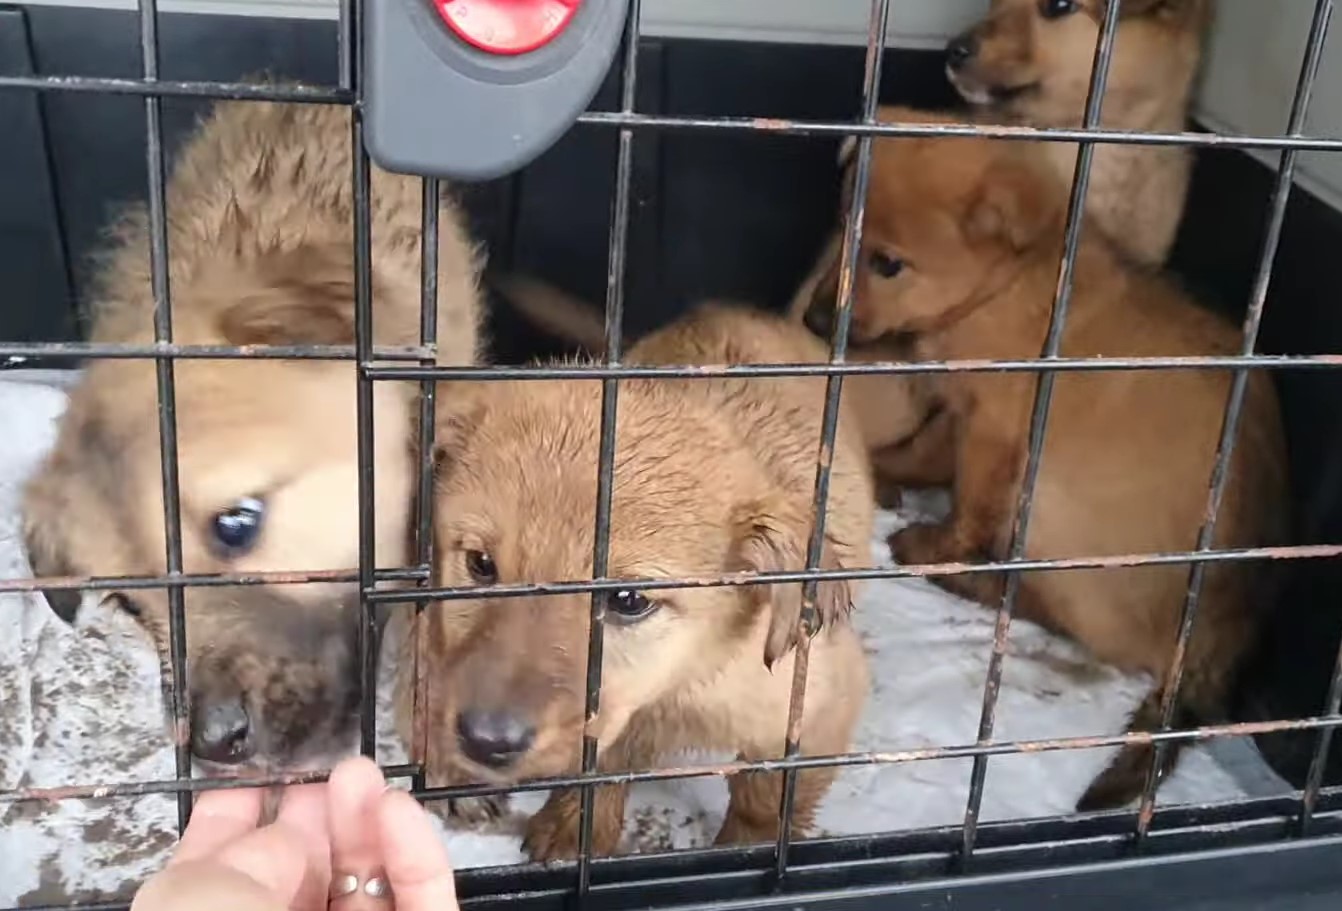 puppies in a kennel